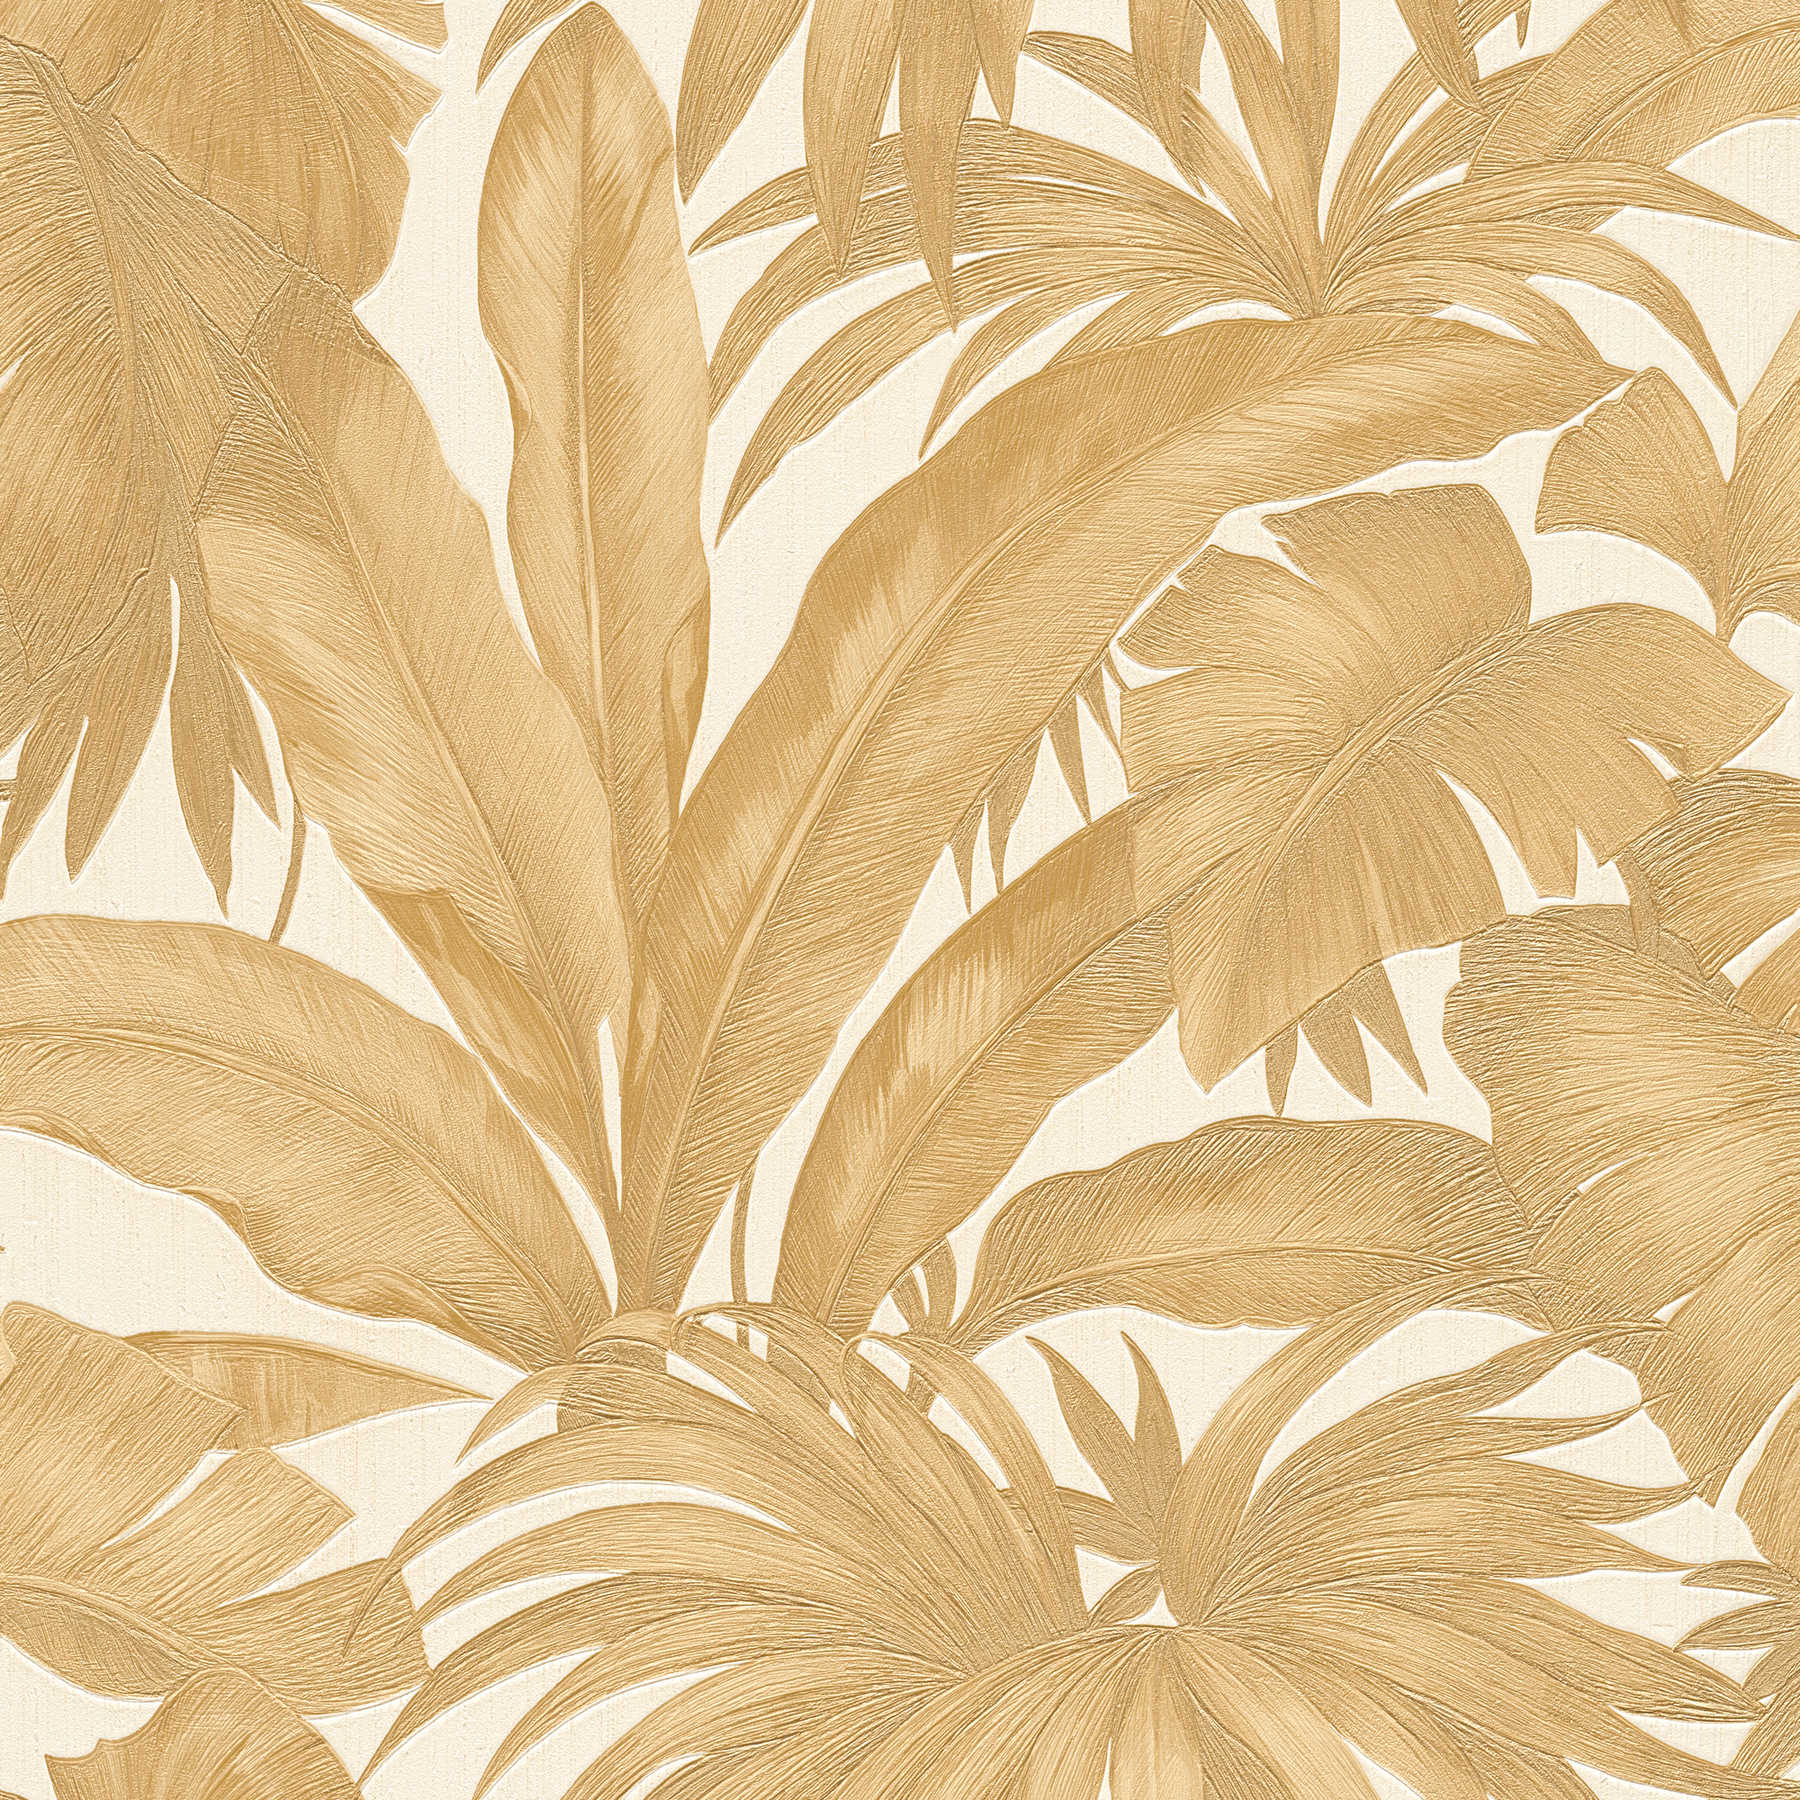 VERSACE wallpaper with palm trees & gold effect - cream, metallic
